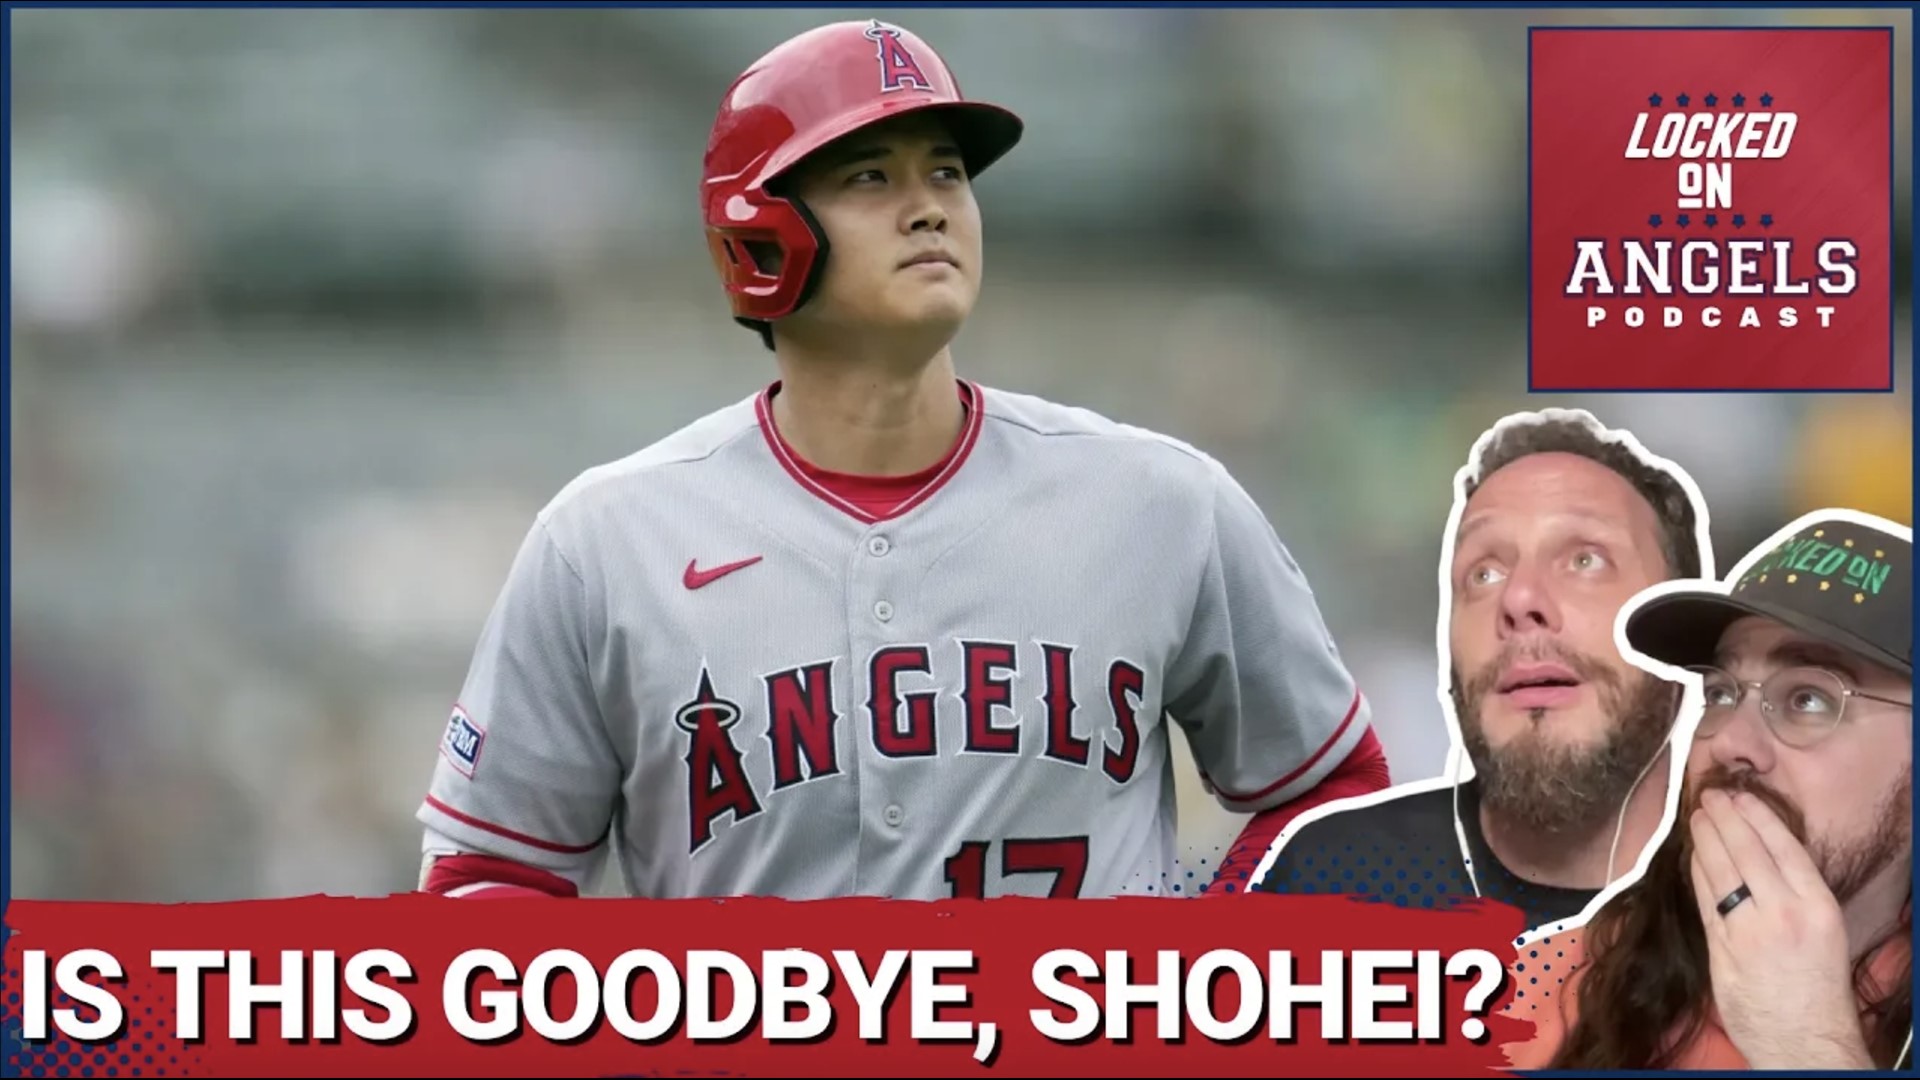 The Los Angeles Angels season is slowly coming to an end, and as we reach the end of the regular season, we're asking, is this goodbye to Shohei Ohtani?